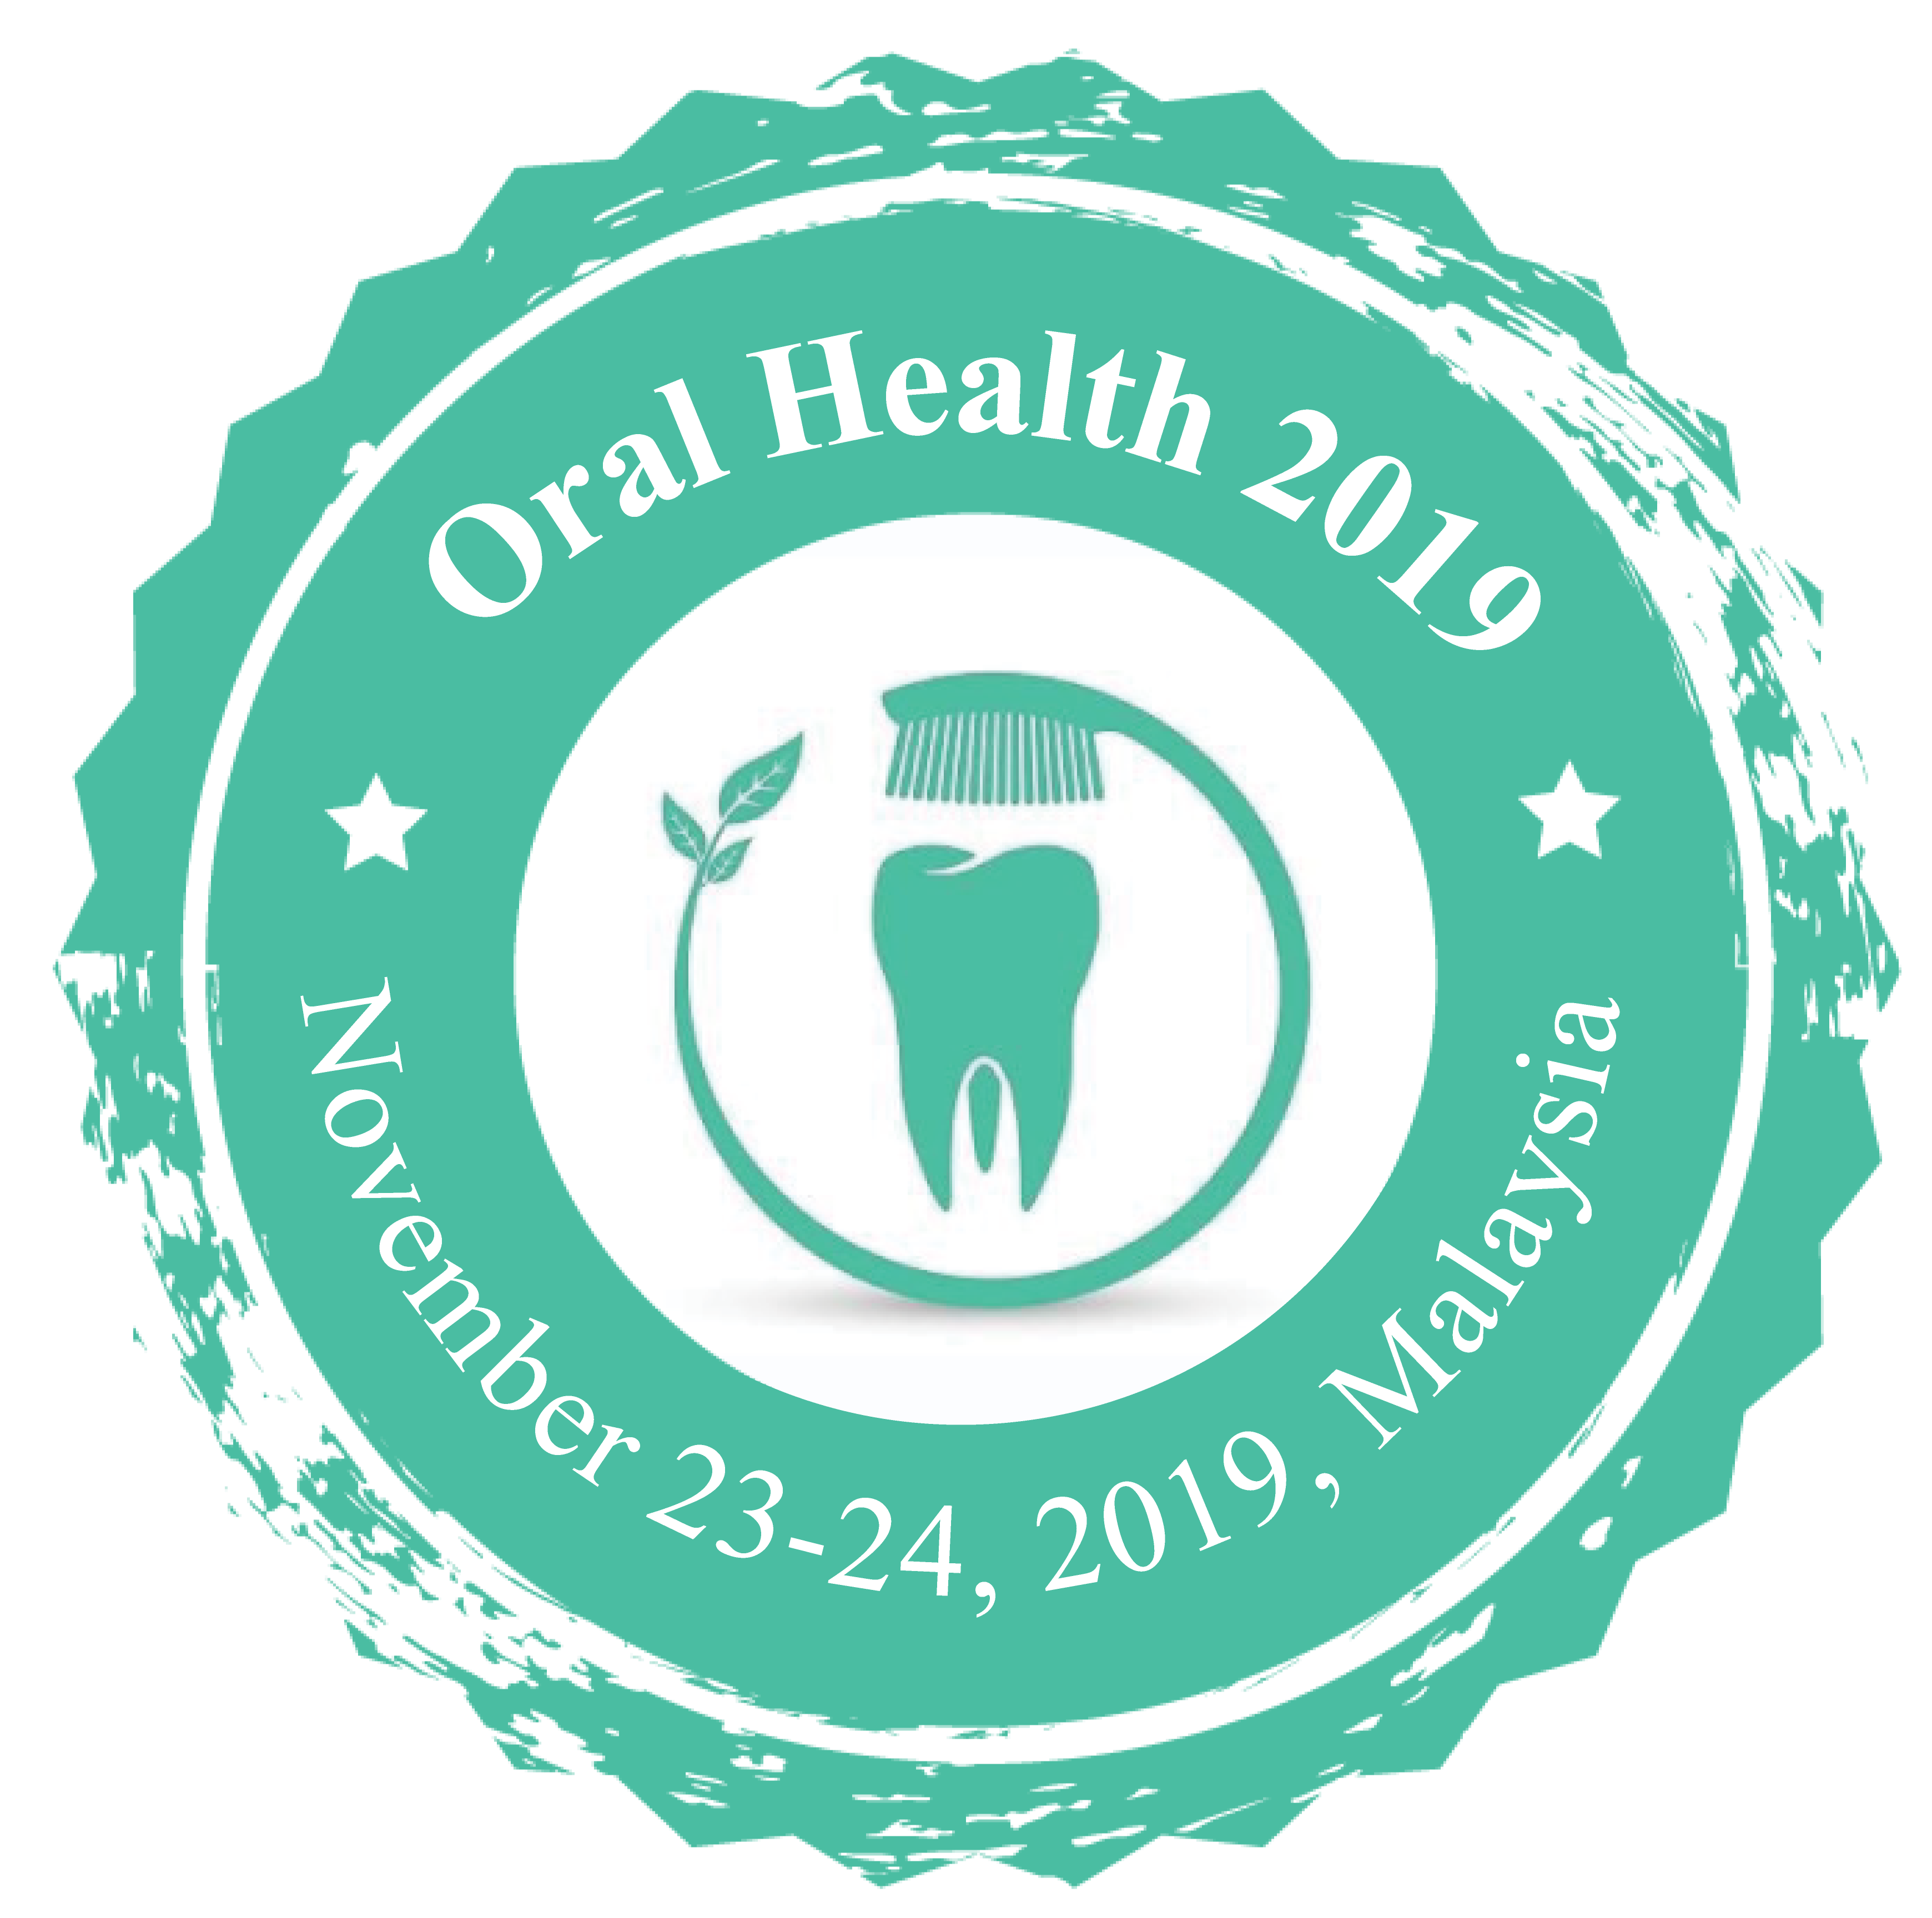 World congress on Dentistry and Oral Health